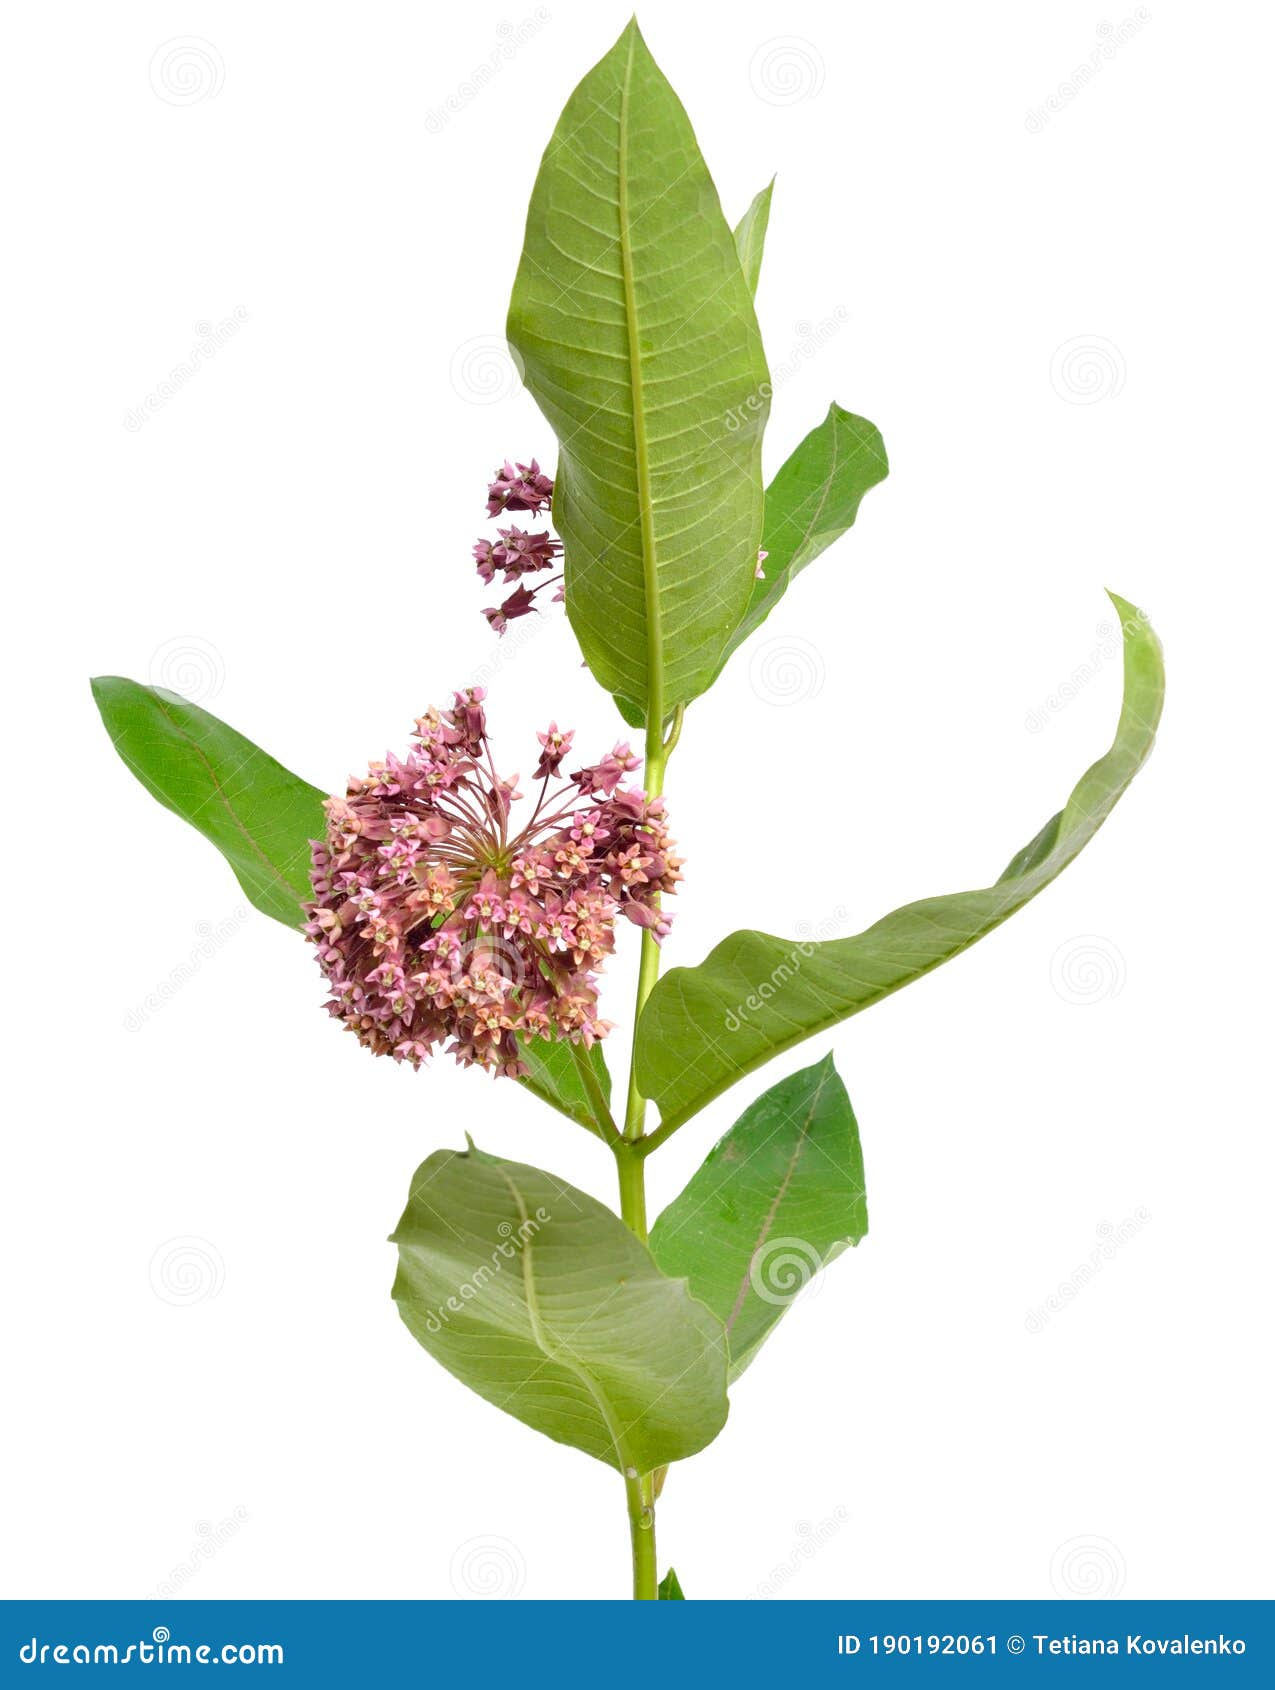 asclepias syriaca, commonly called common milkweed, butterfly flower, silkweed, silky swallow-wort.  on white